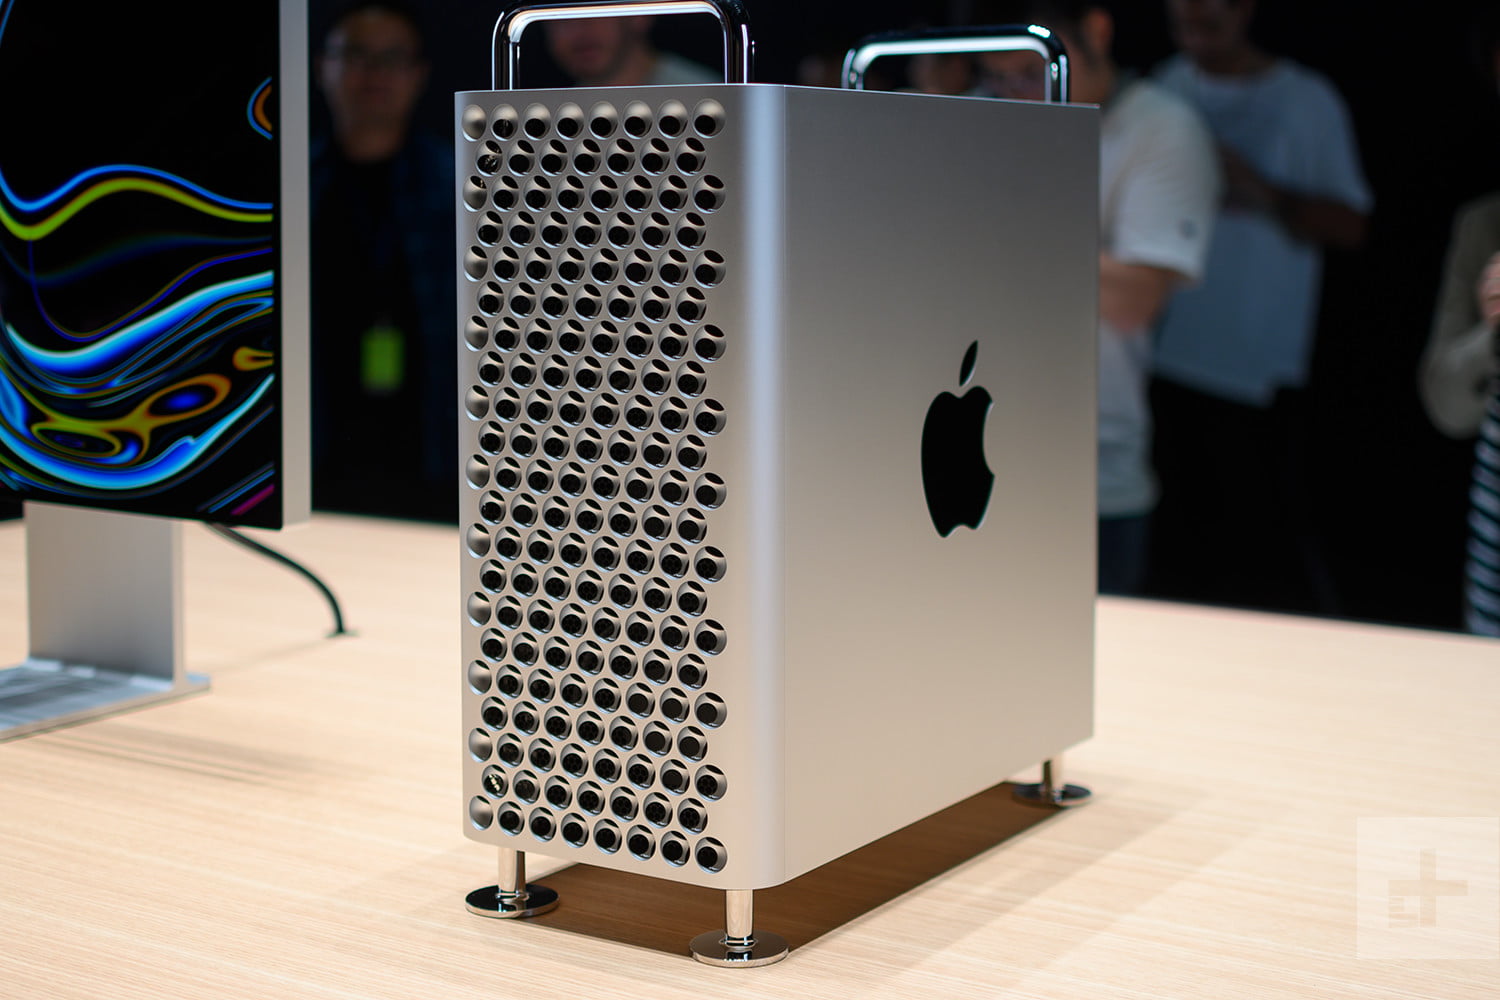 Apple Mac Pro (2019) See All The Specs, Features, Release Date